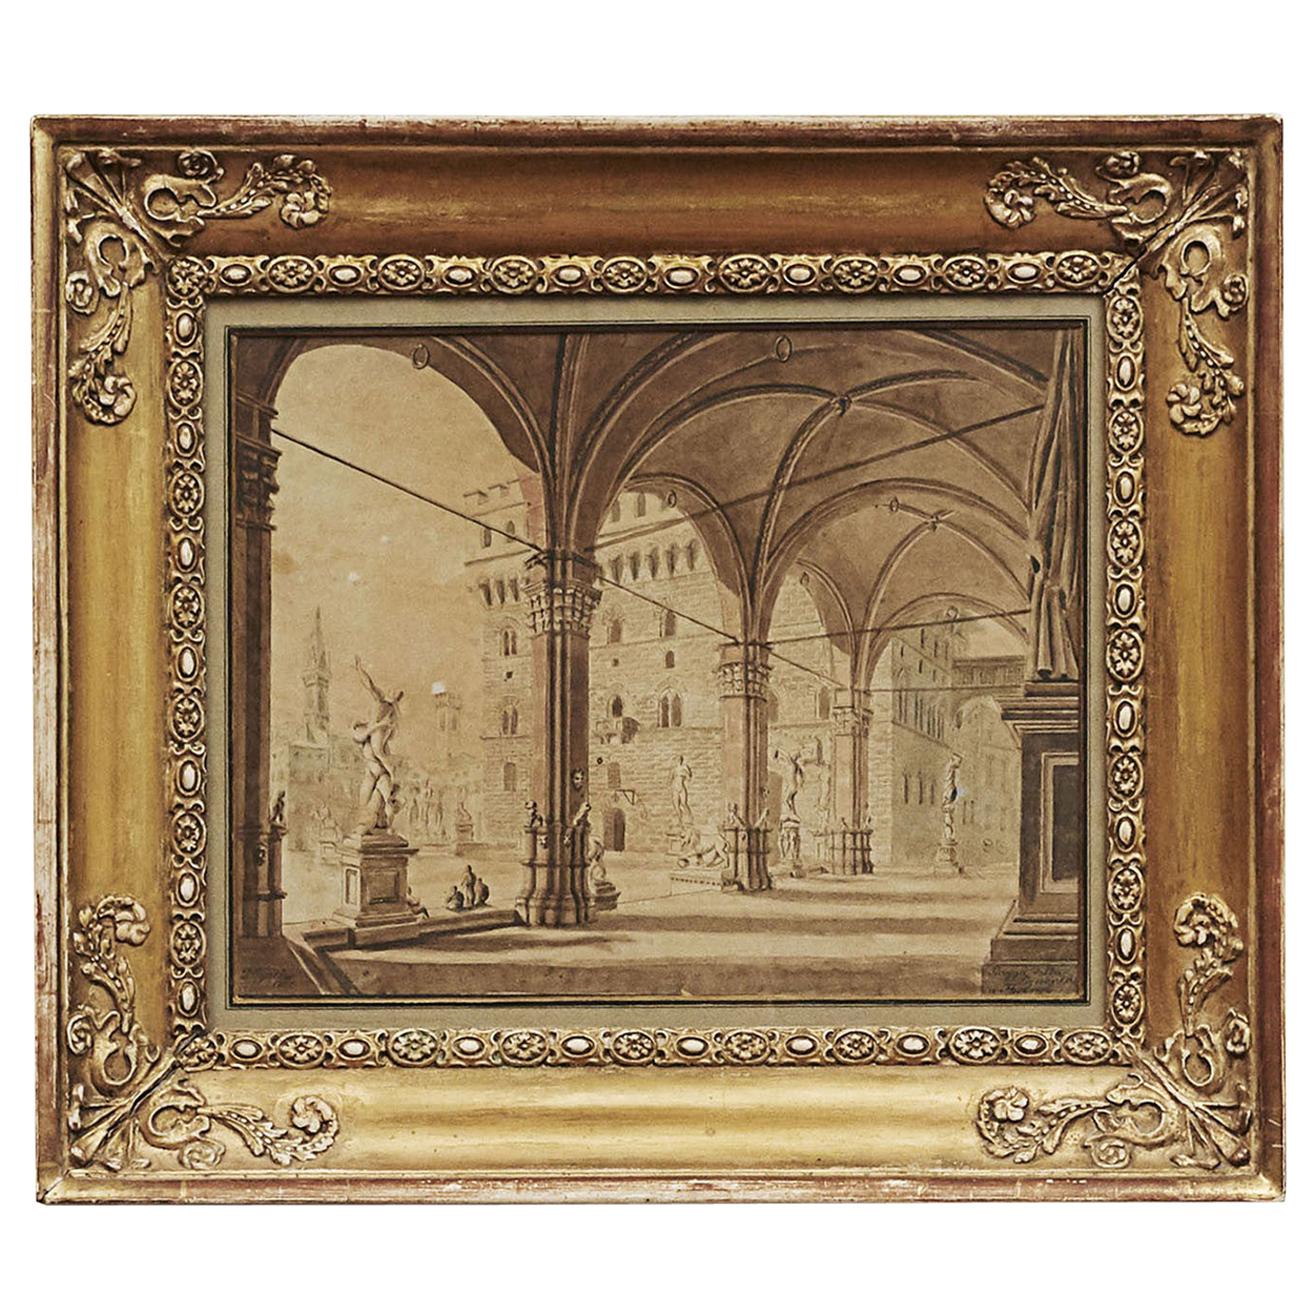 "Palazzo della Signoria", Florence. Signed P. Gynther, 1822 For Sale